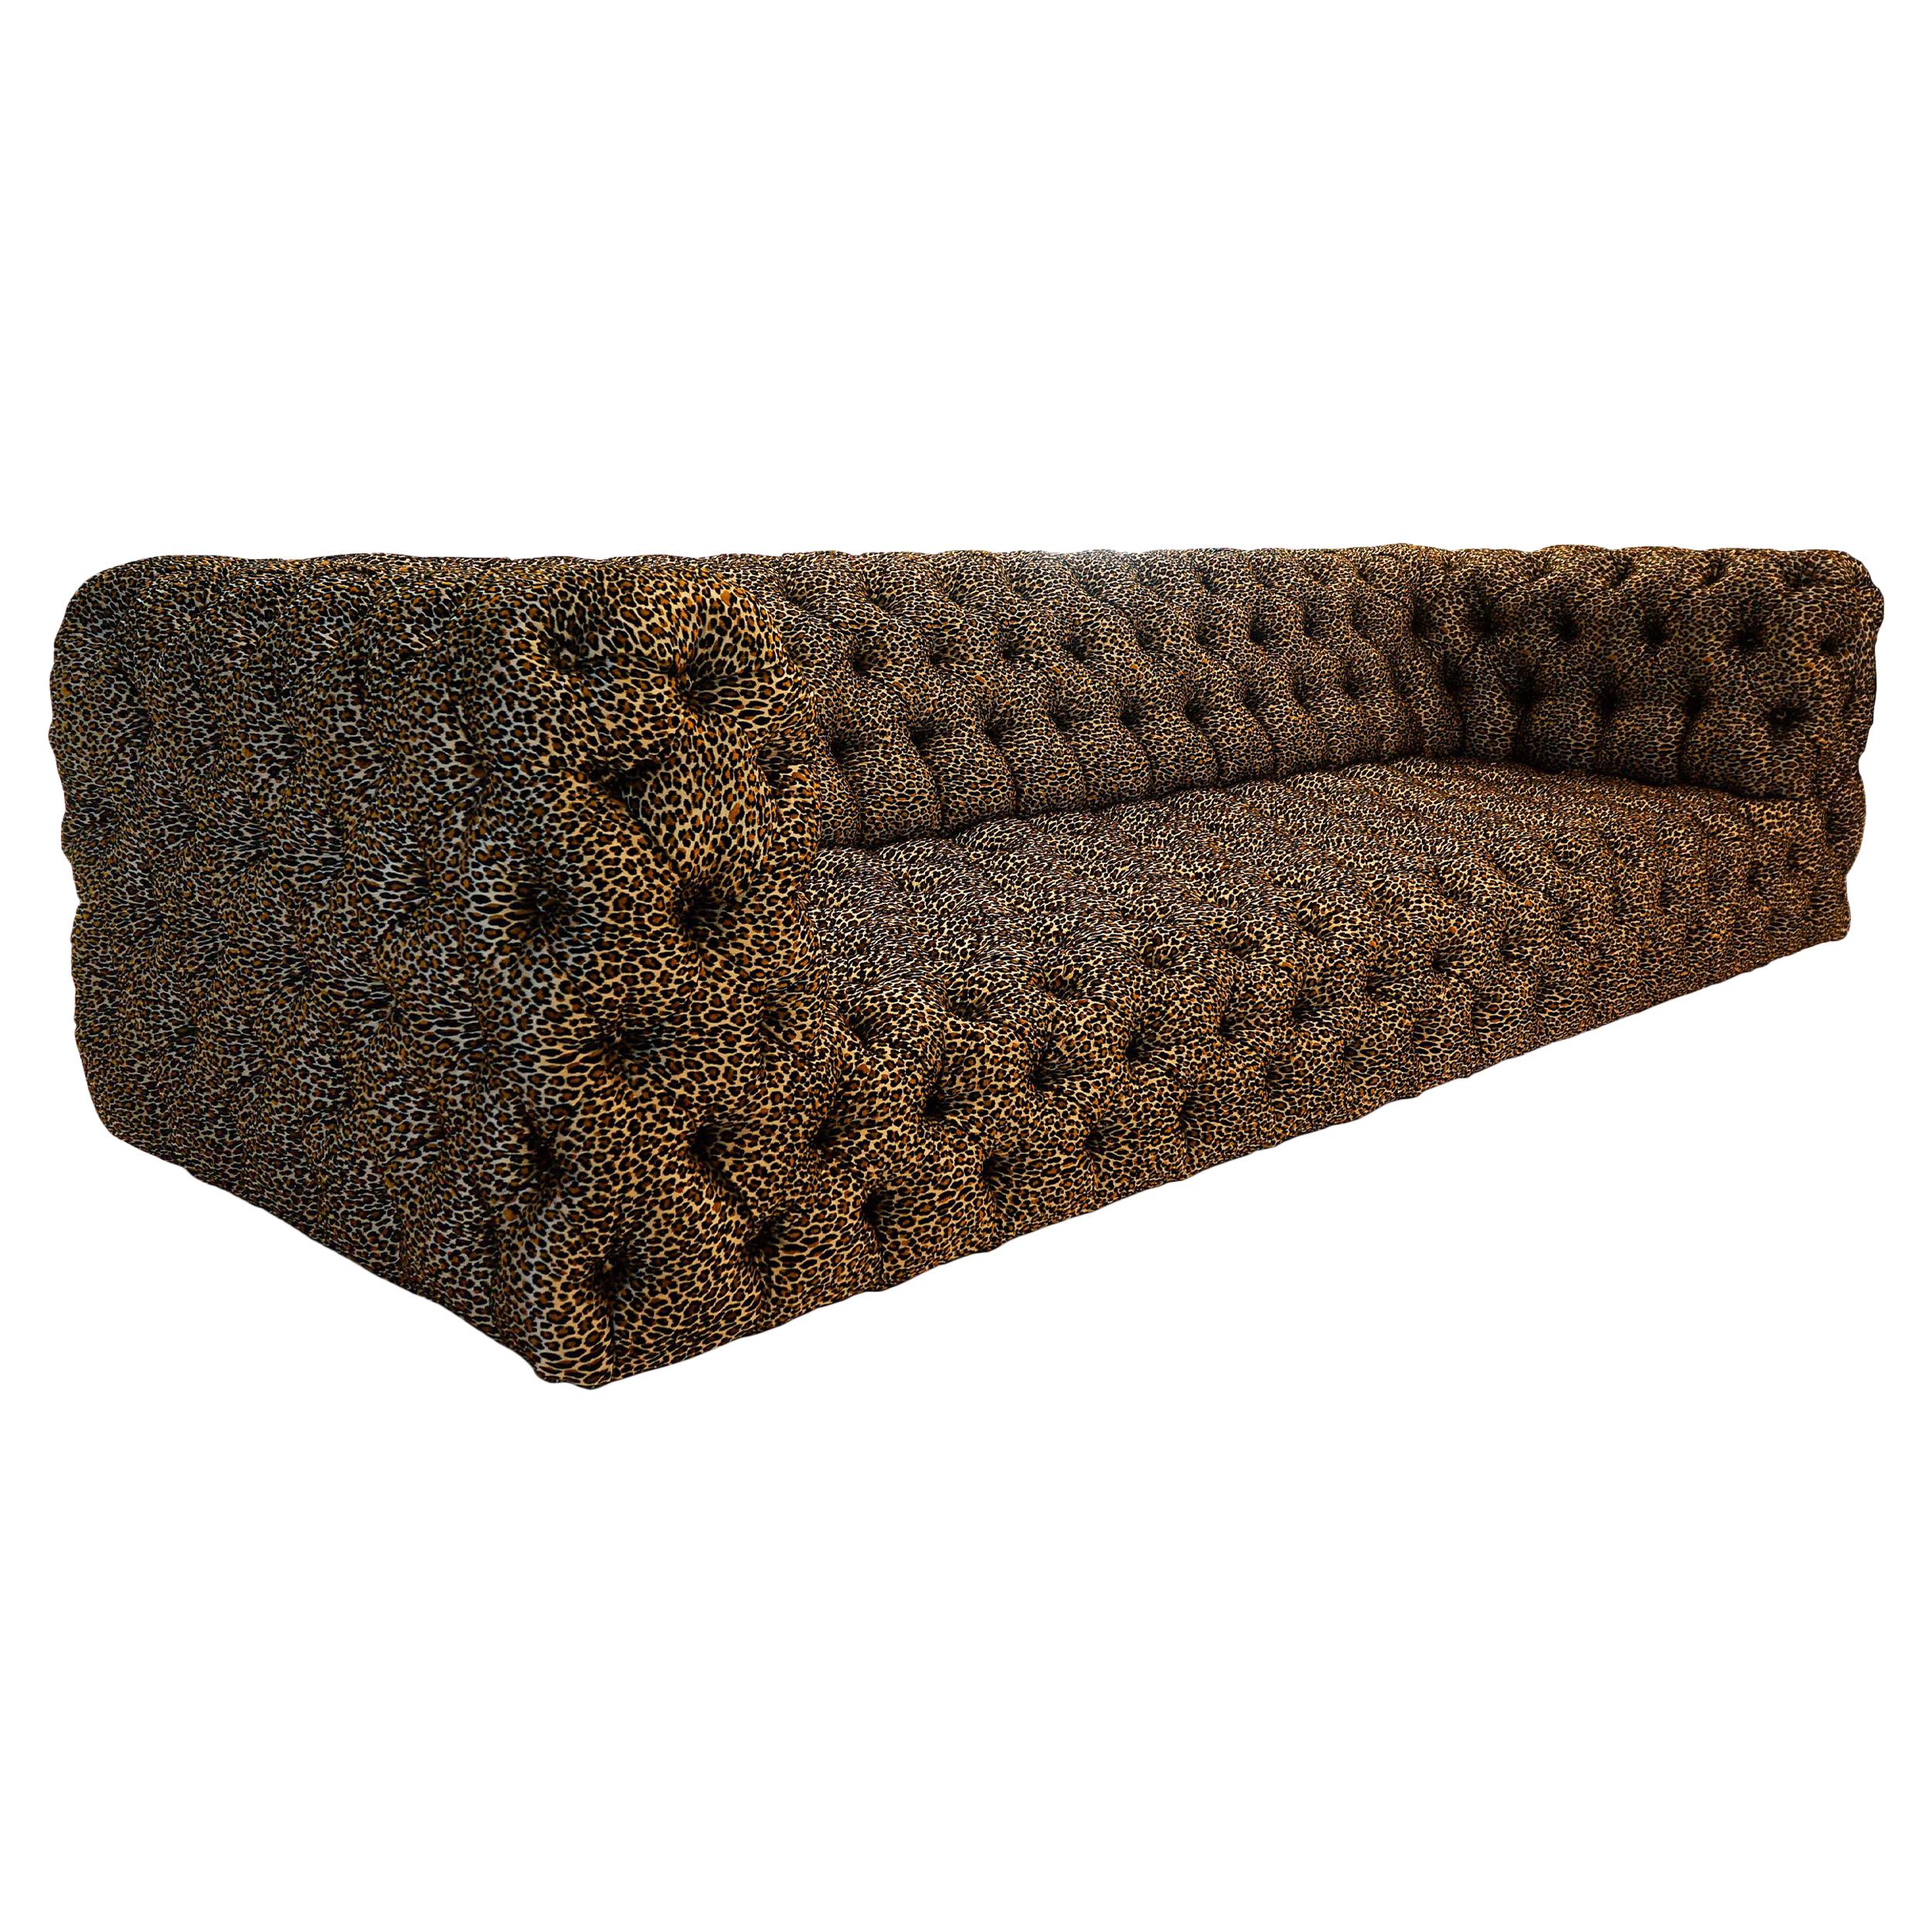 Tufted Leopard Print Sofa For At